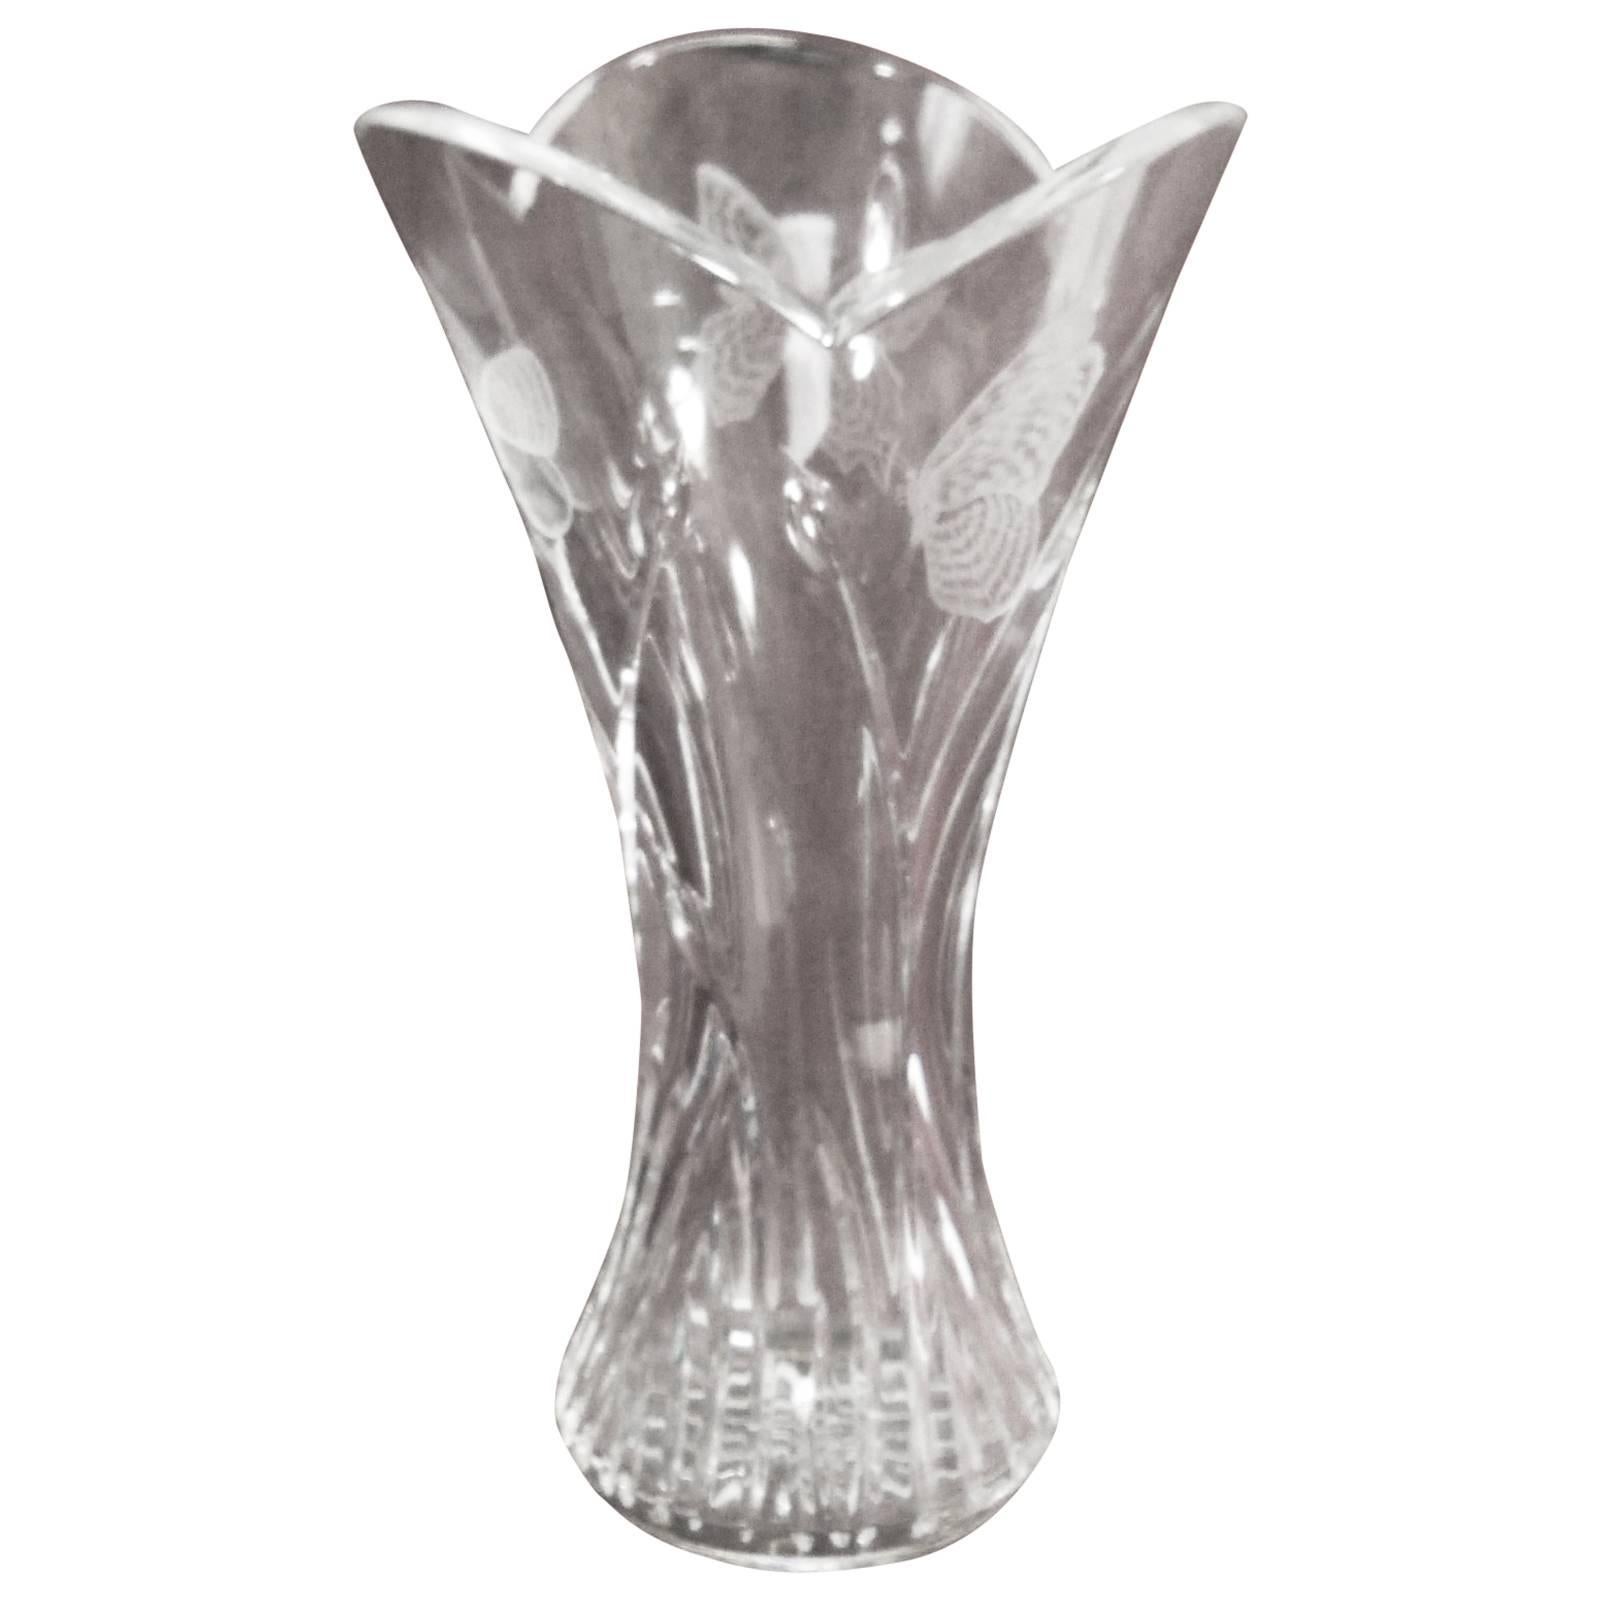 Waterford Crystal Designers Gallery Butterfly Vase David Boyce #119 of 2500 For Sale